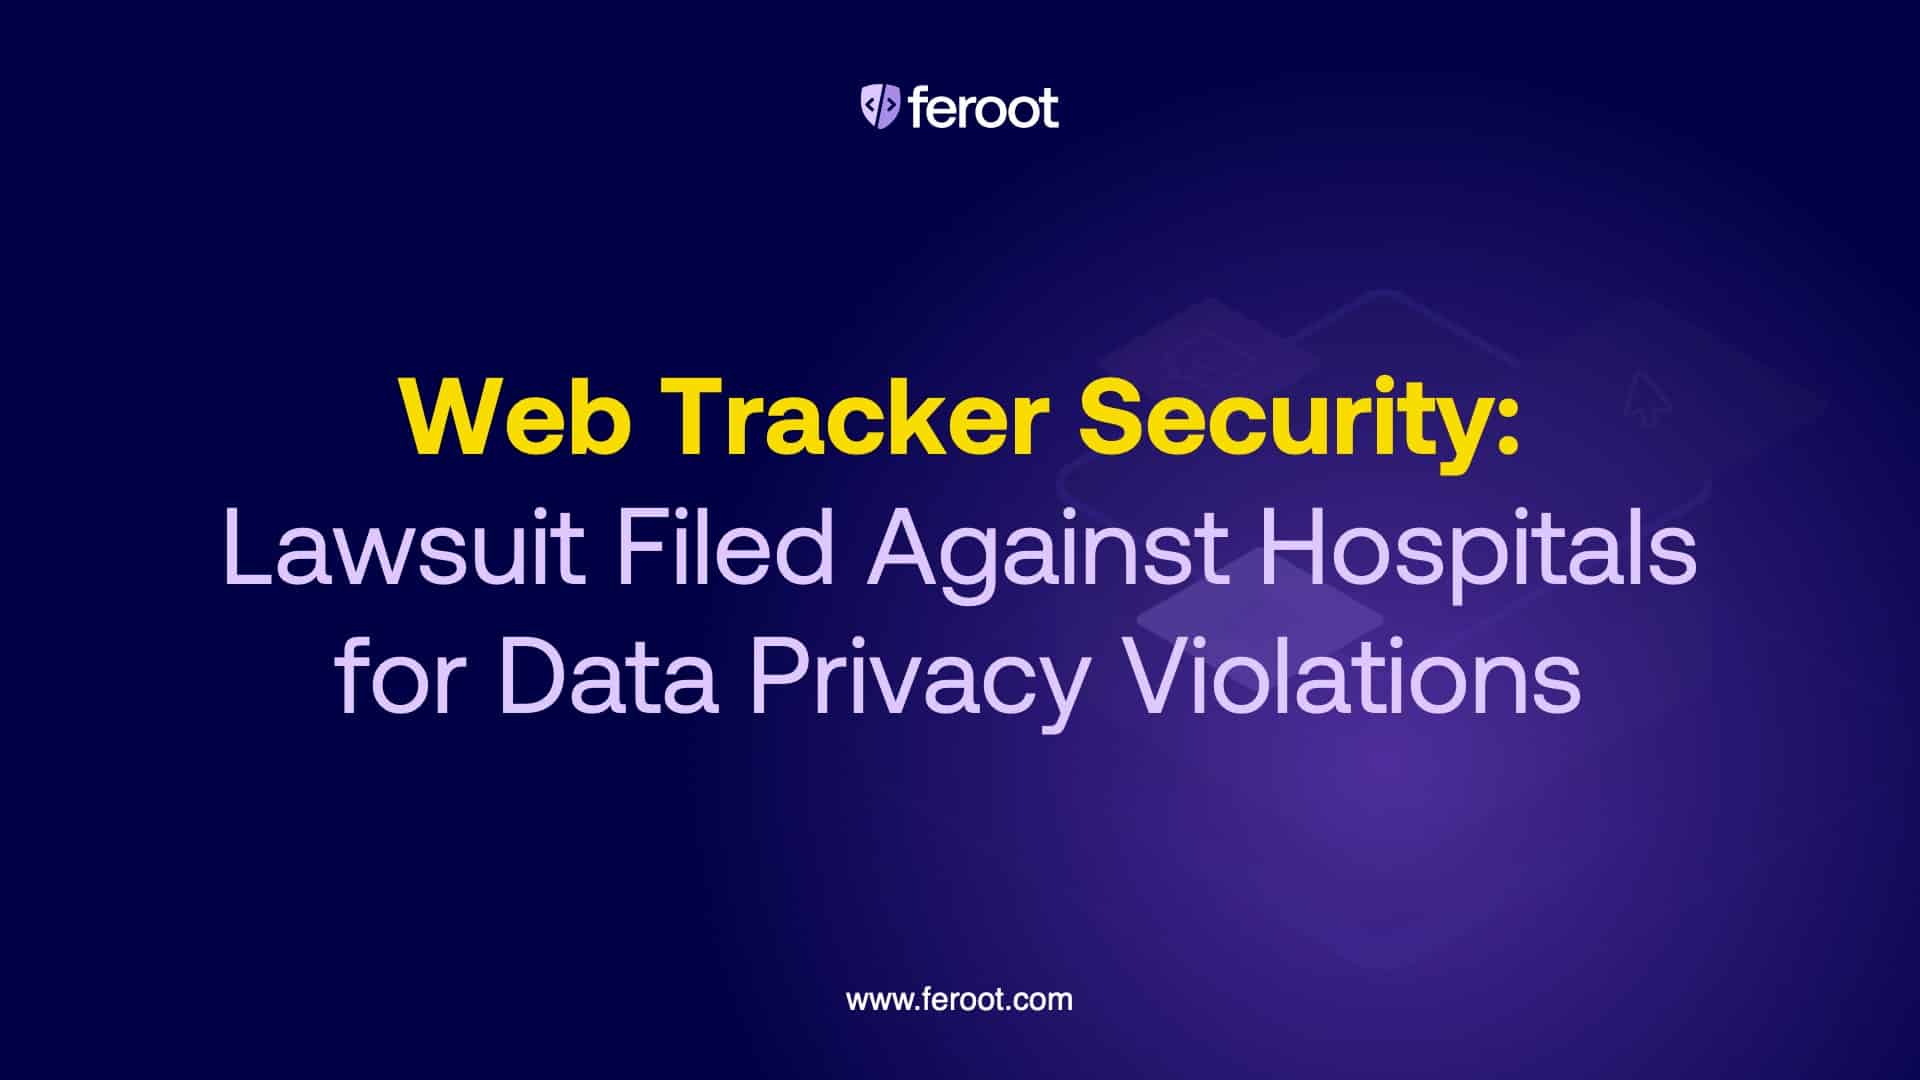 Web Tracker Security: Lawsuit Filed Against Hospitals for Data Privacy Violations